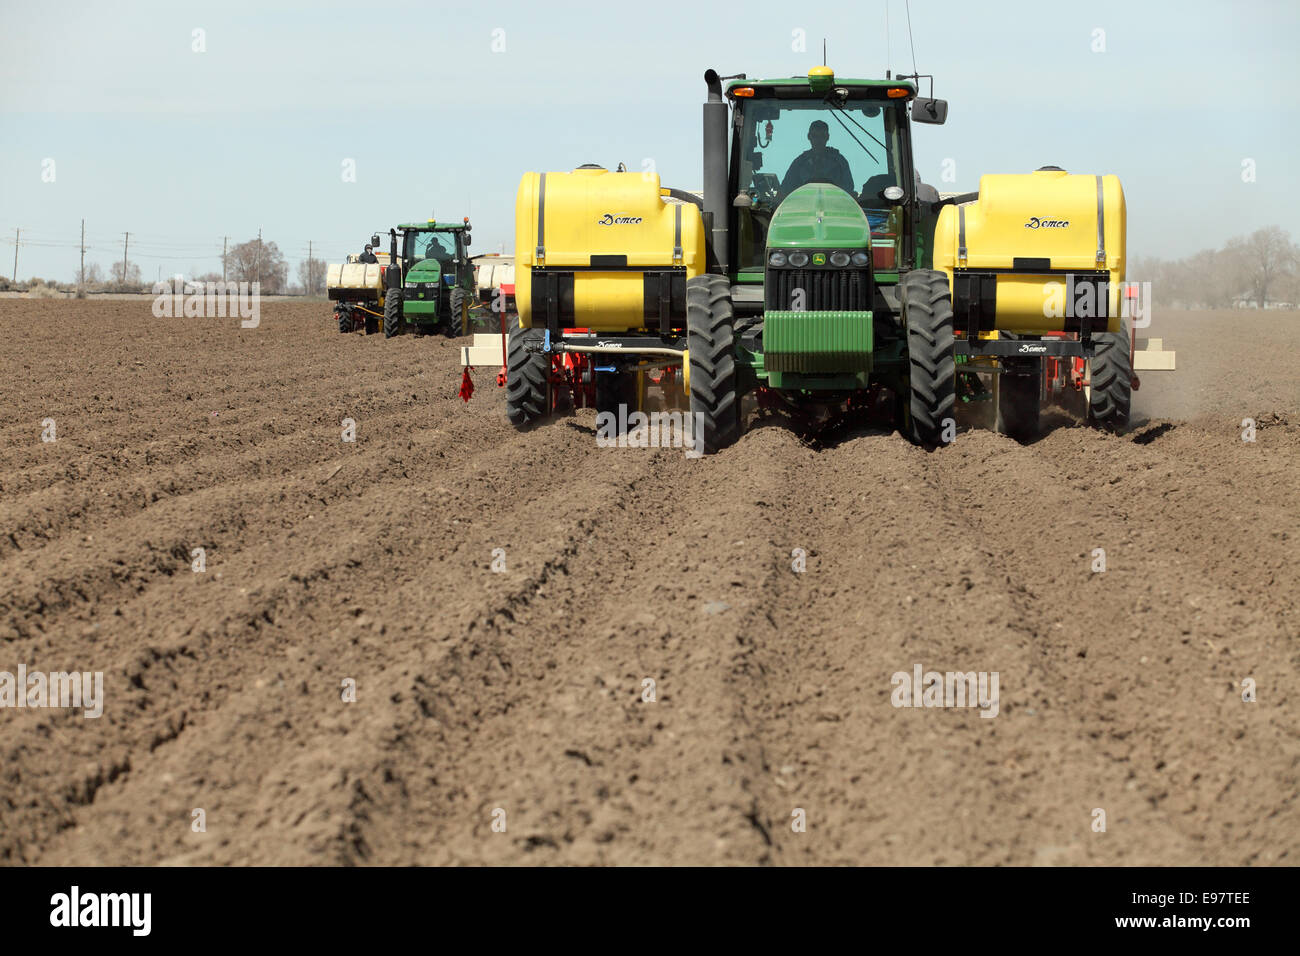 Tractors working planting potatoes in the fertile farm fields of Idaho. Stock Photo